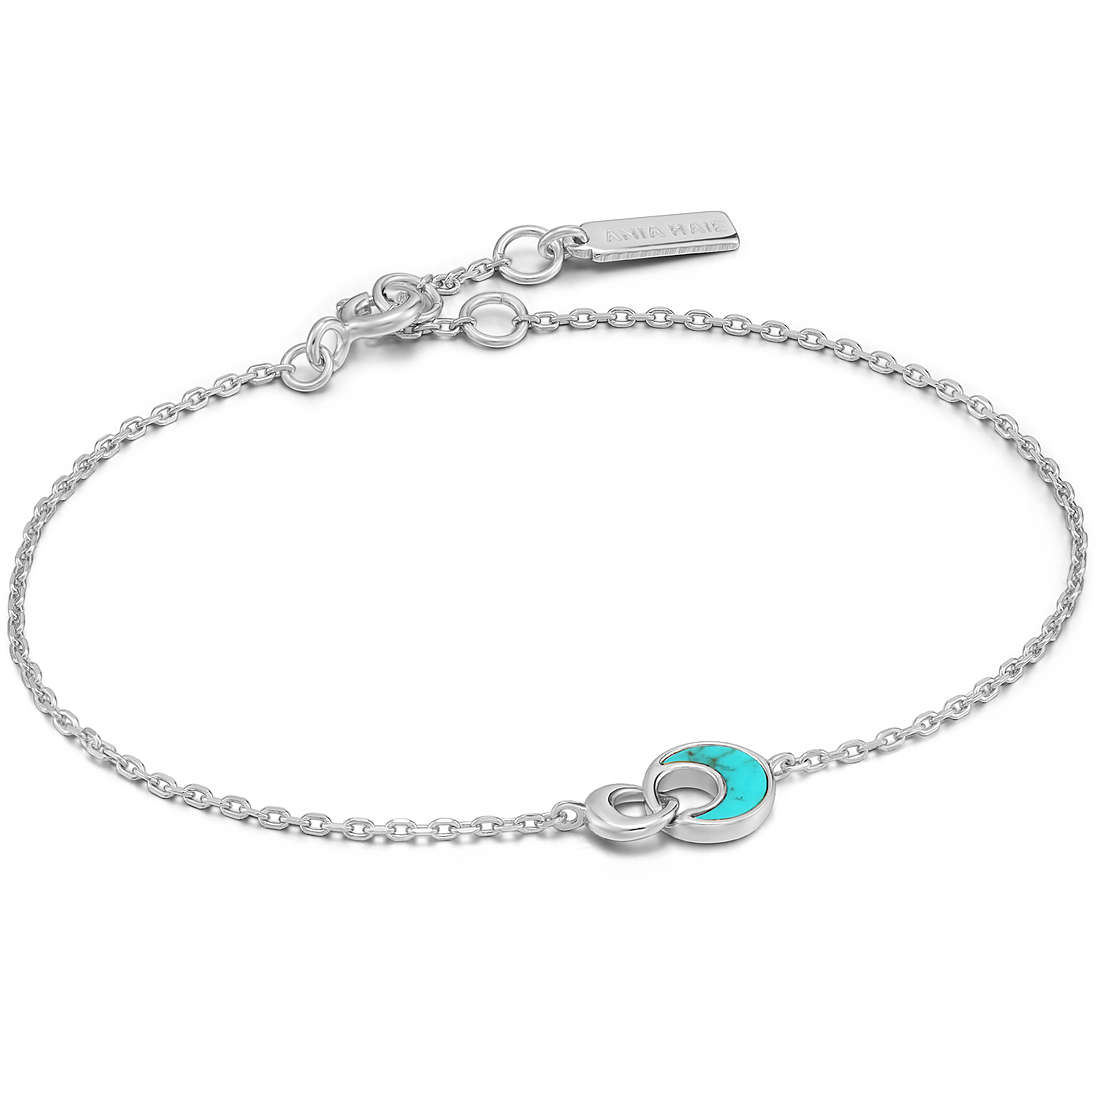 Ania Haie Turning Tides bracelet woman Bracelet with 925 Silver Charms/Beads jewel B027-03H